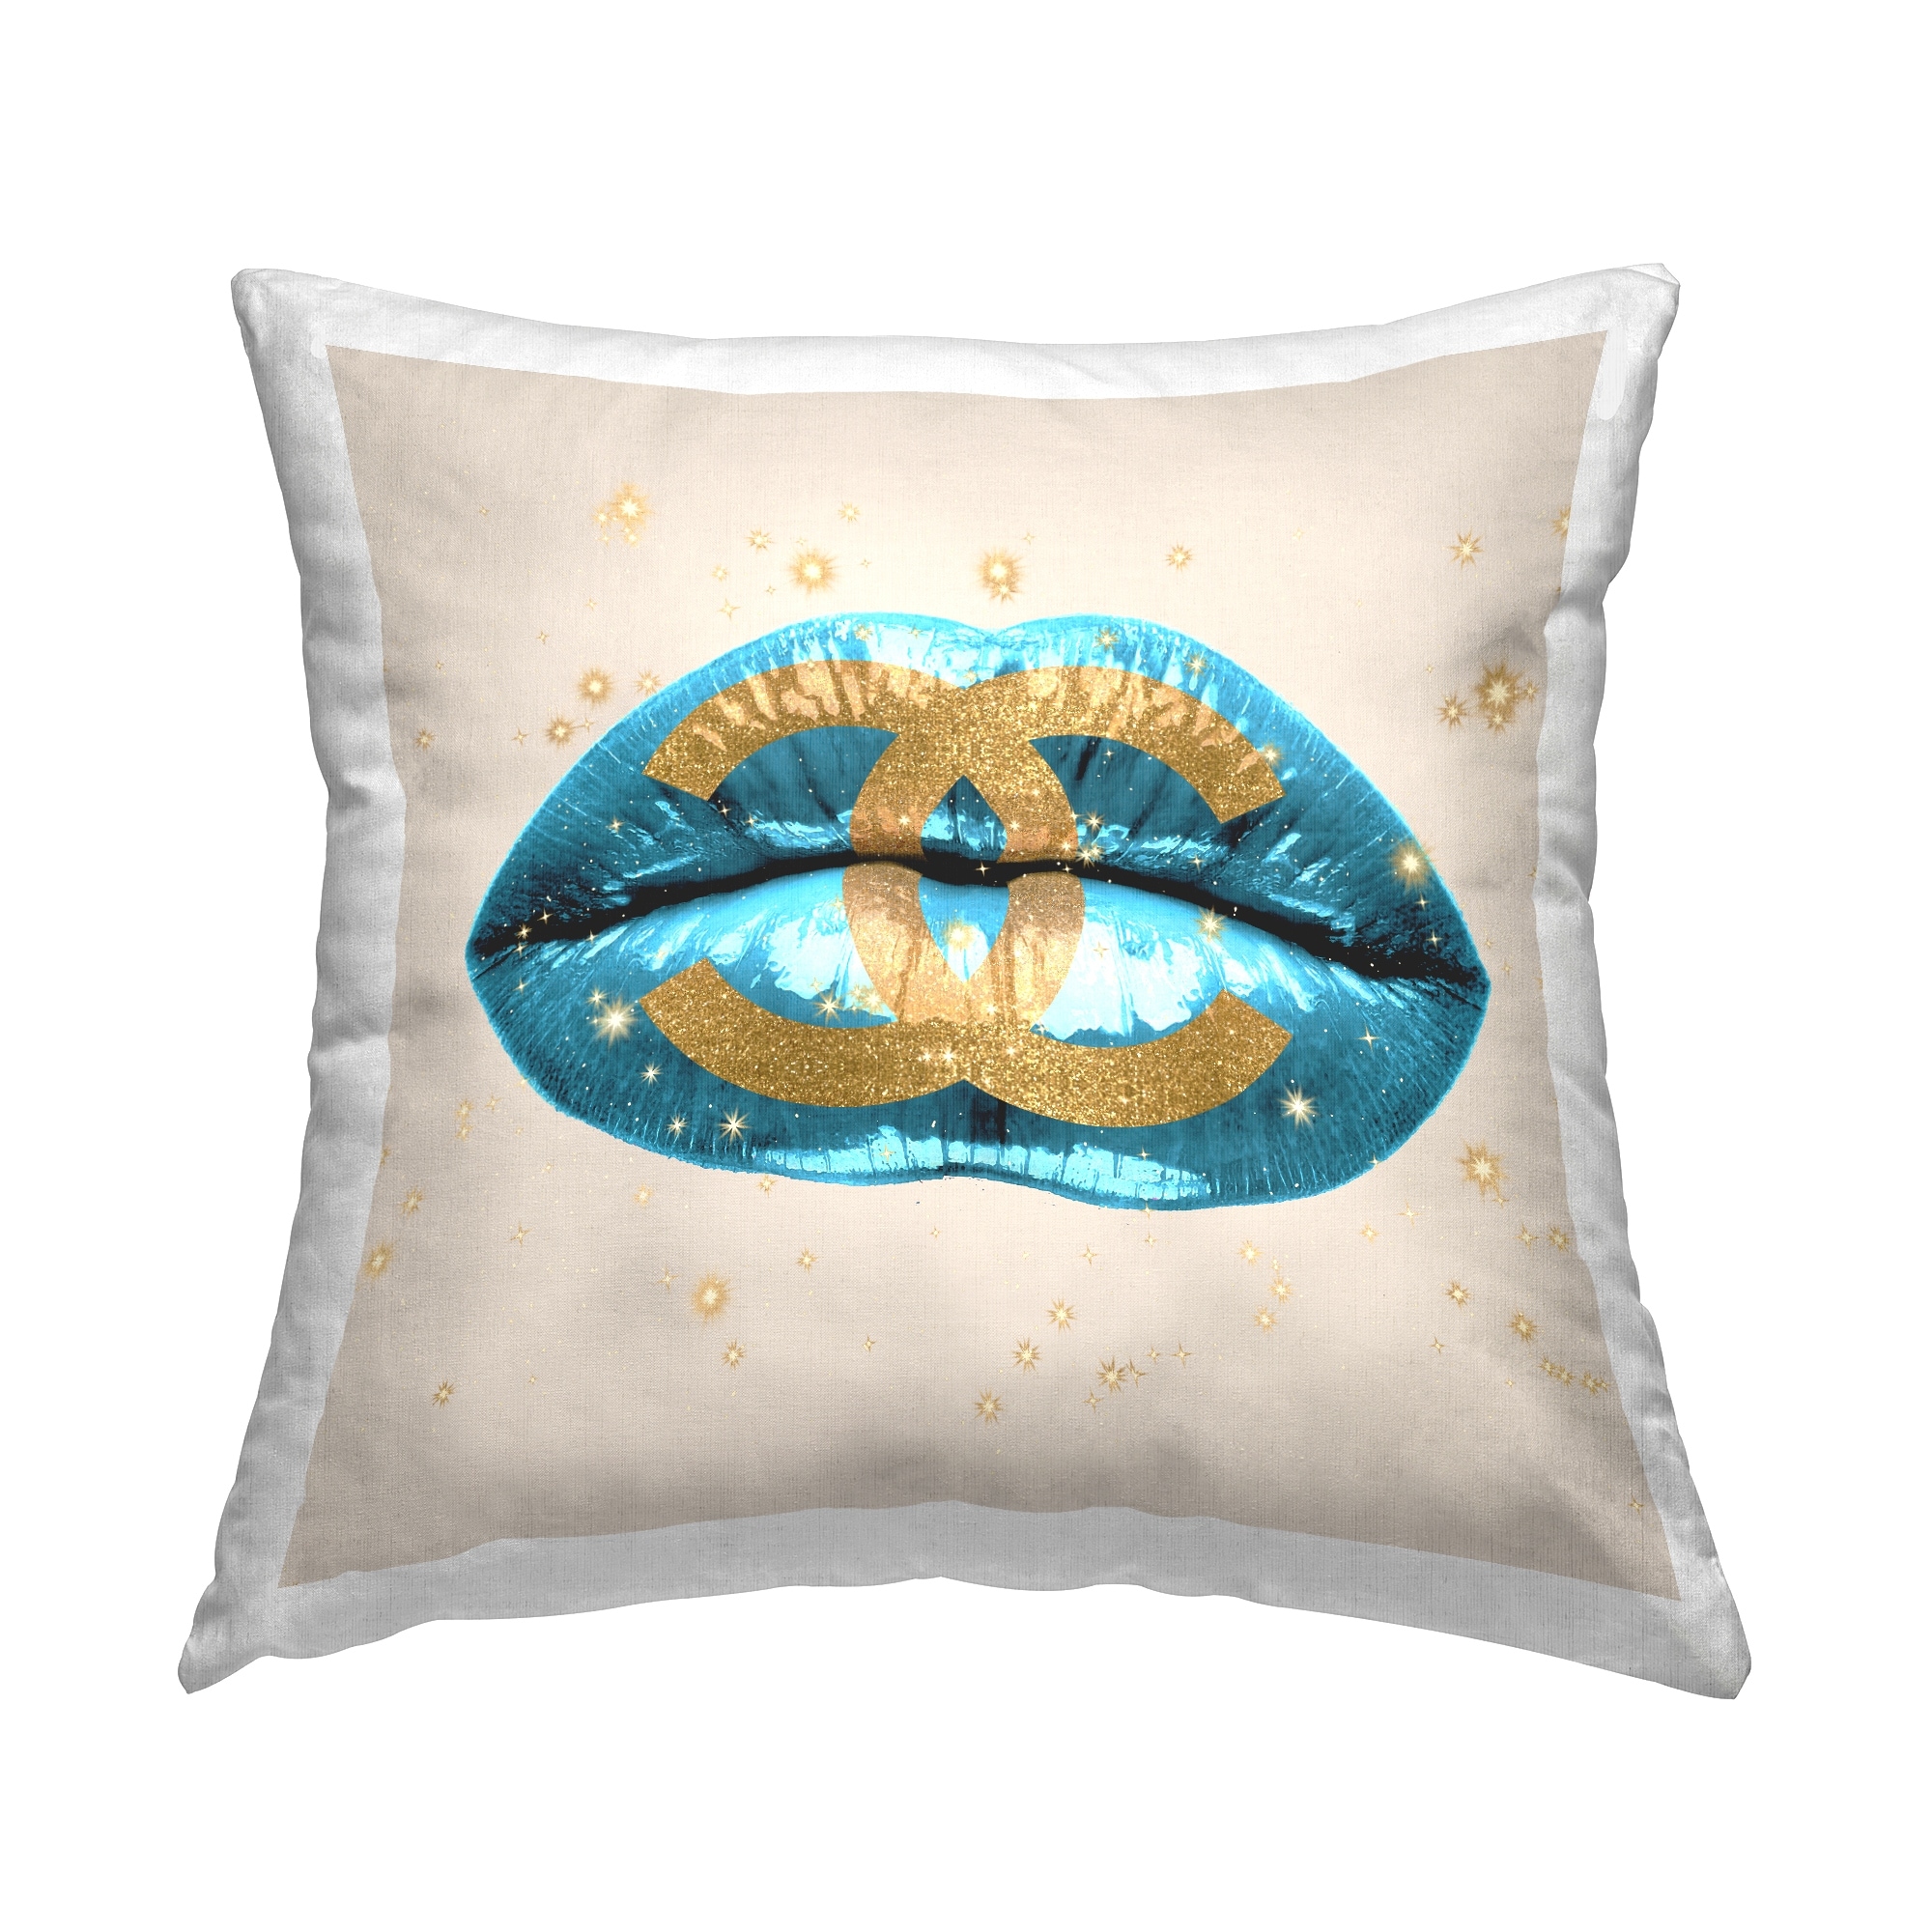 Stupell Industries Blue Fashion Lipstick Brand Lips Printed Throw Pillow  Design by Madeline Blake - Bed Bath & Beyond - 37667958